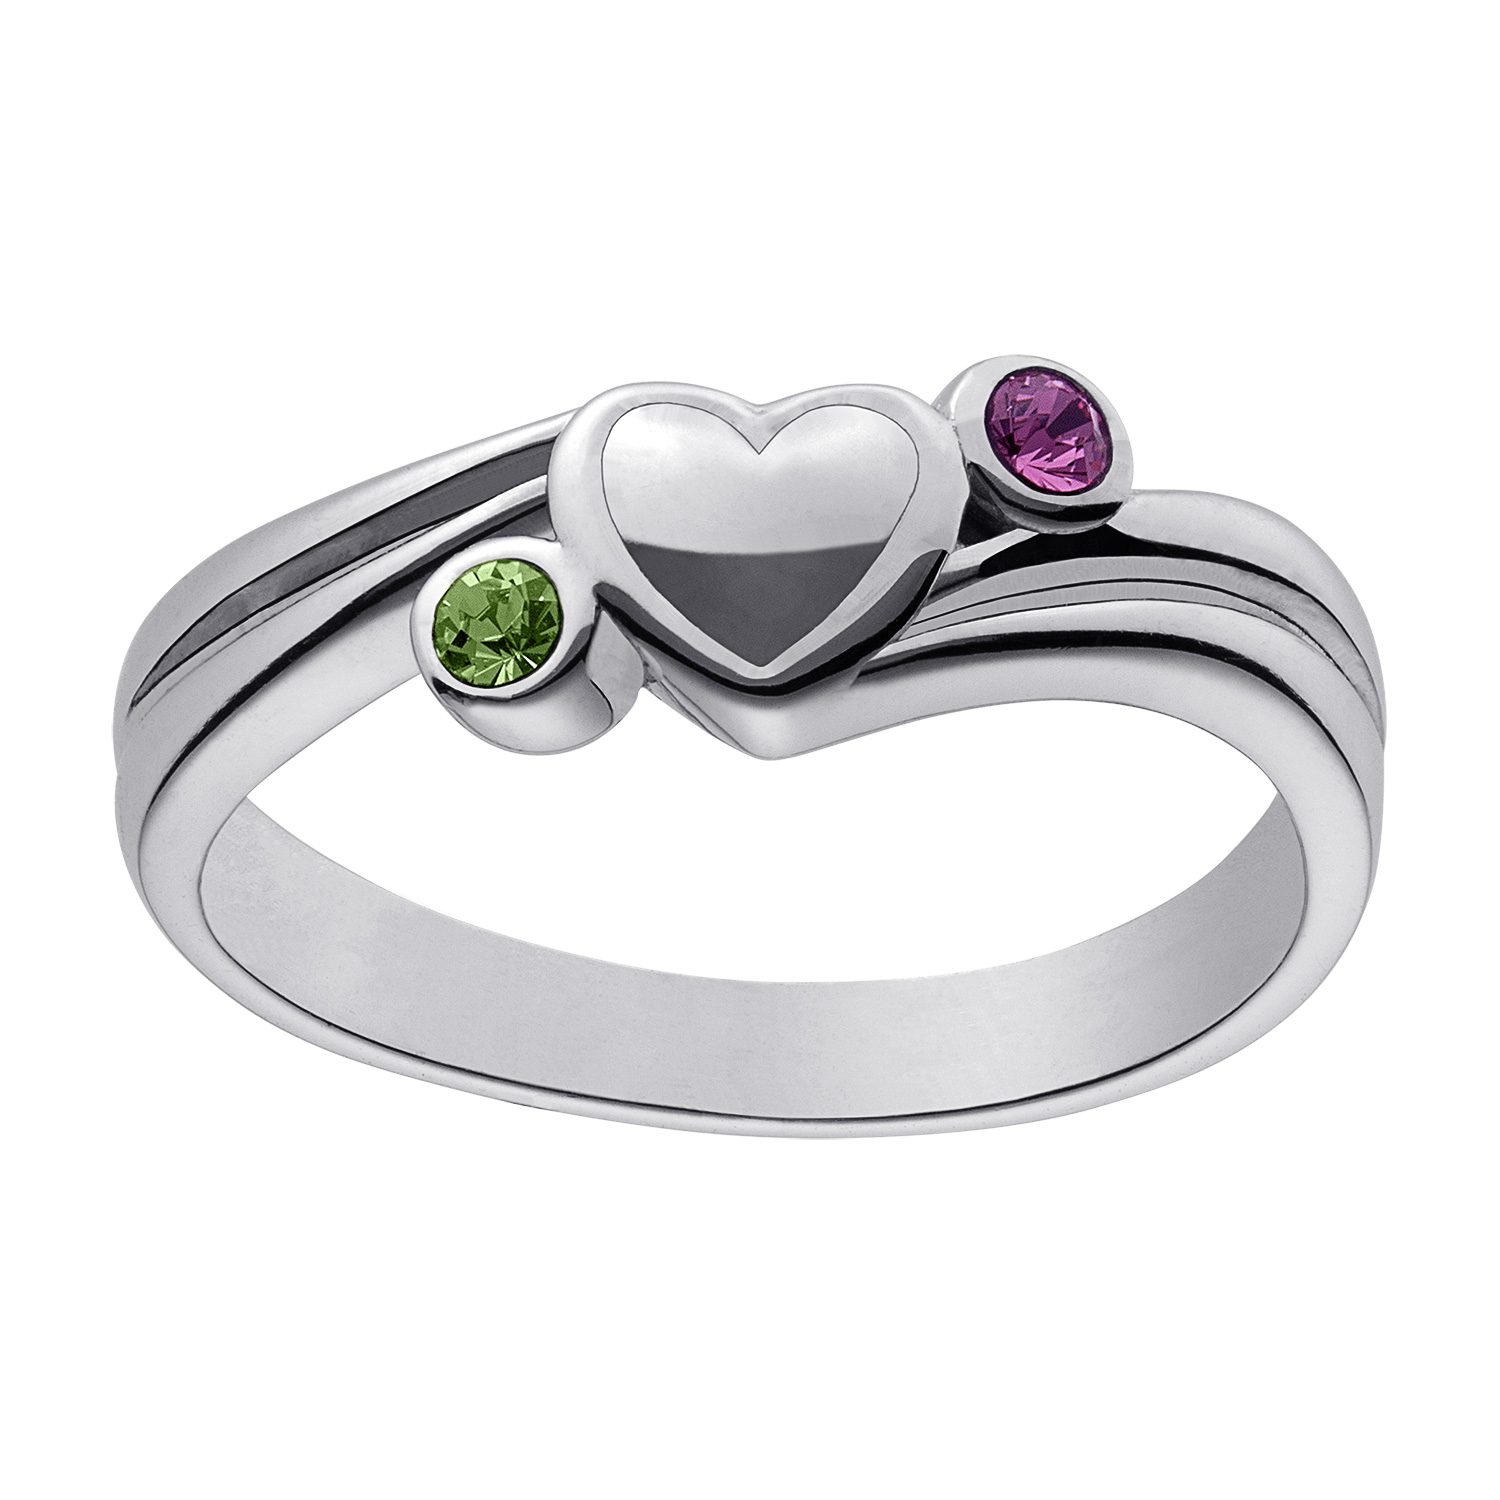 Couples All My Heart Birthstone Ring